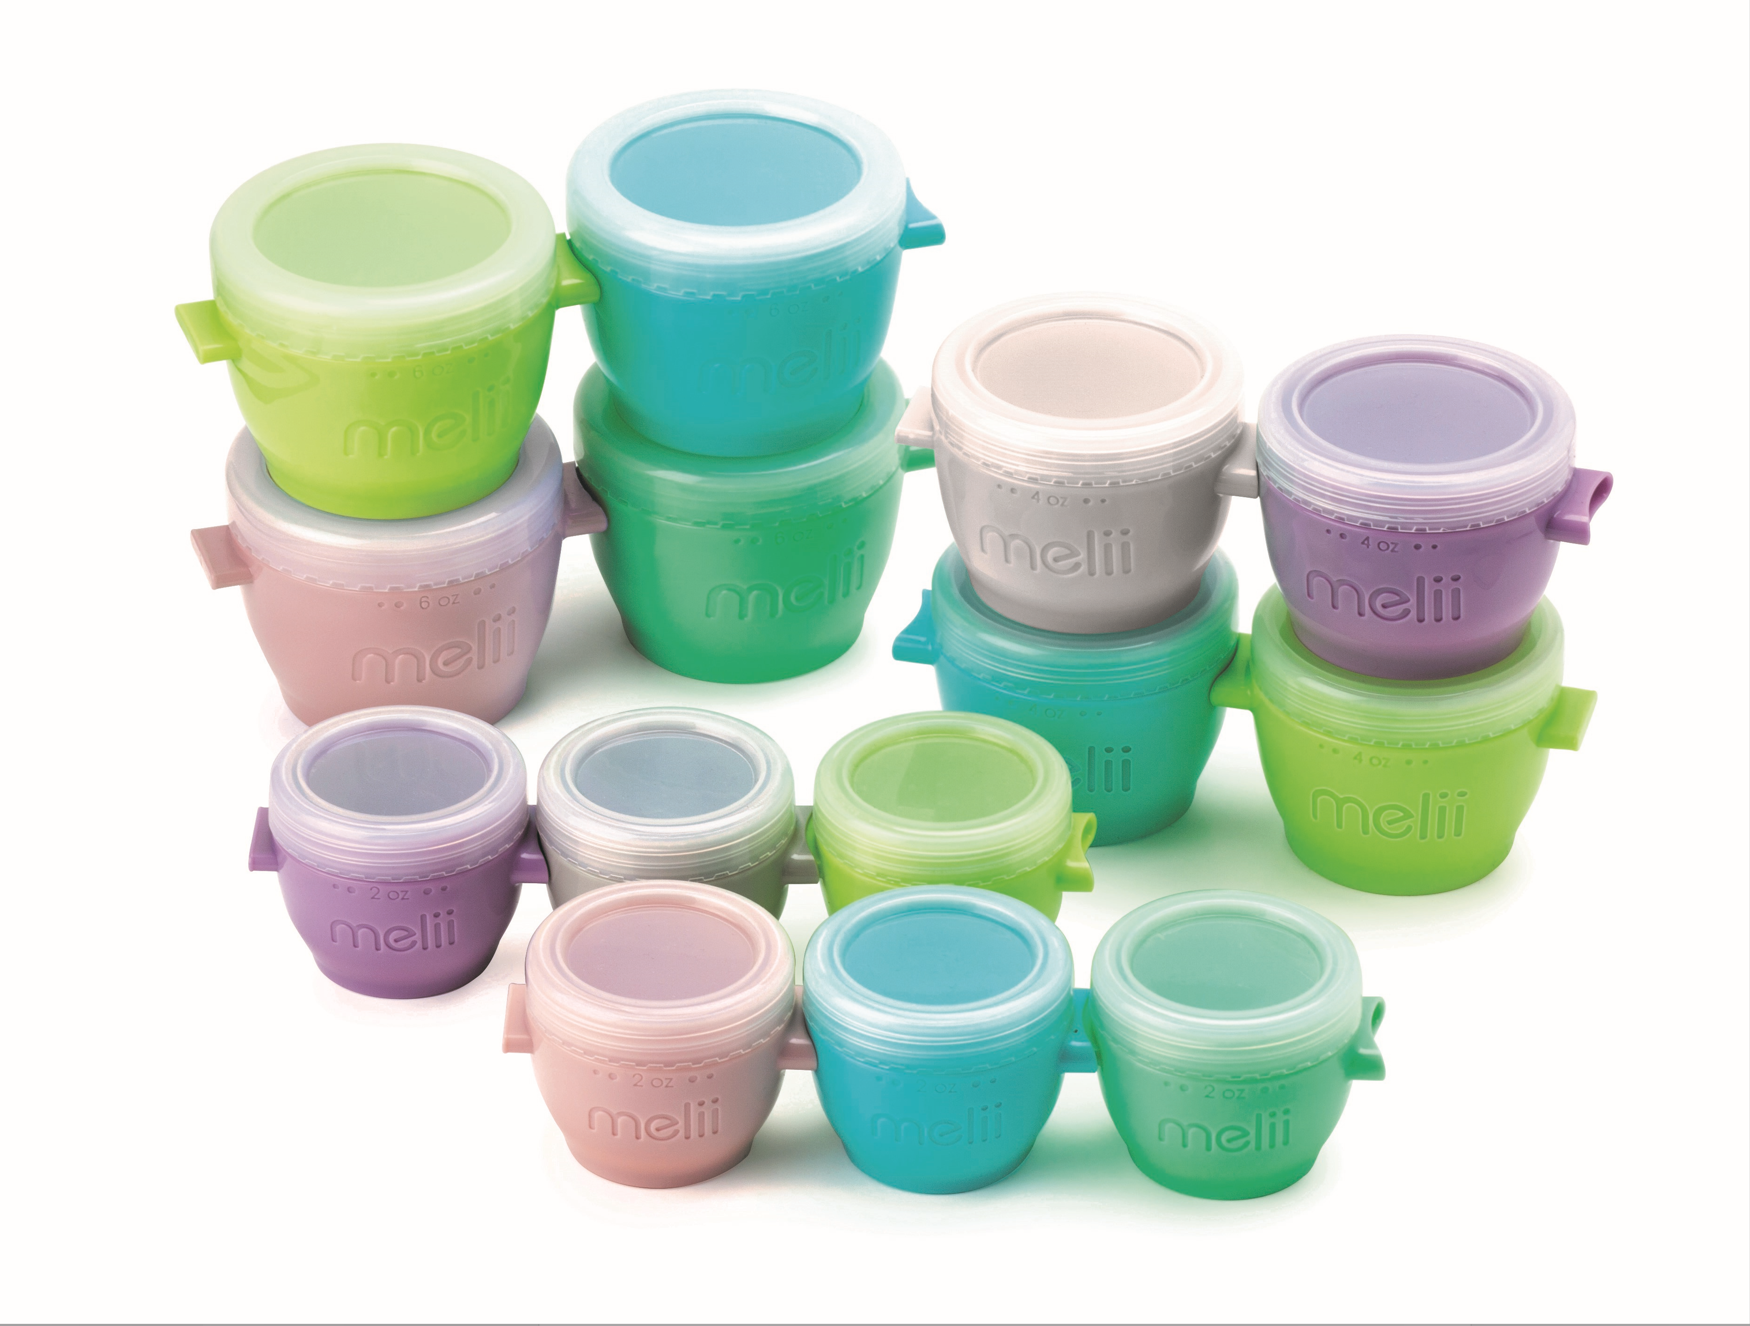 Melii Snap & Go Baby Food Freezer Storage Containers